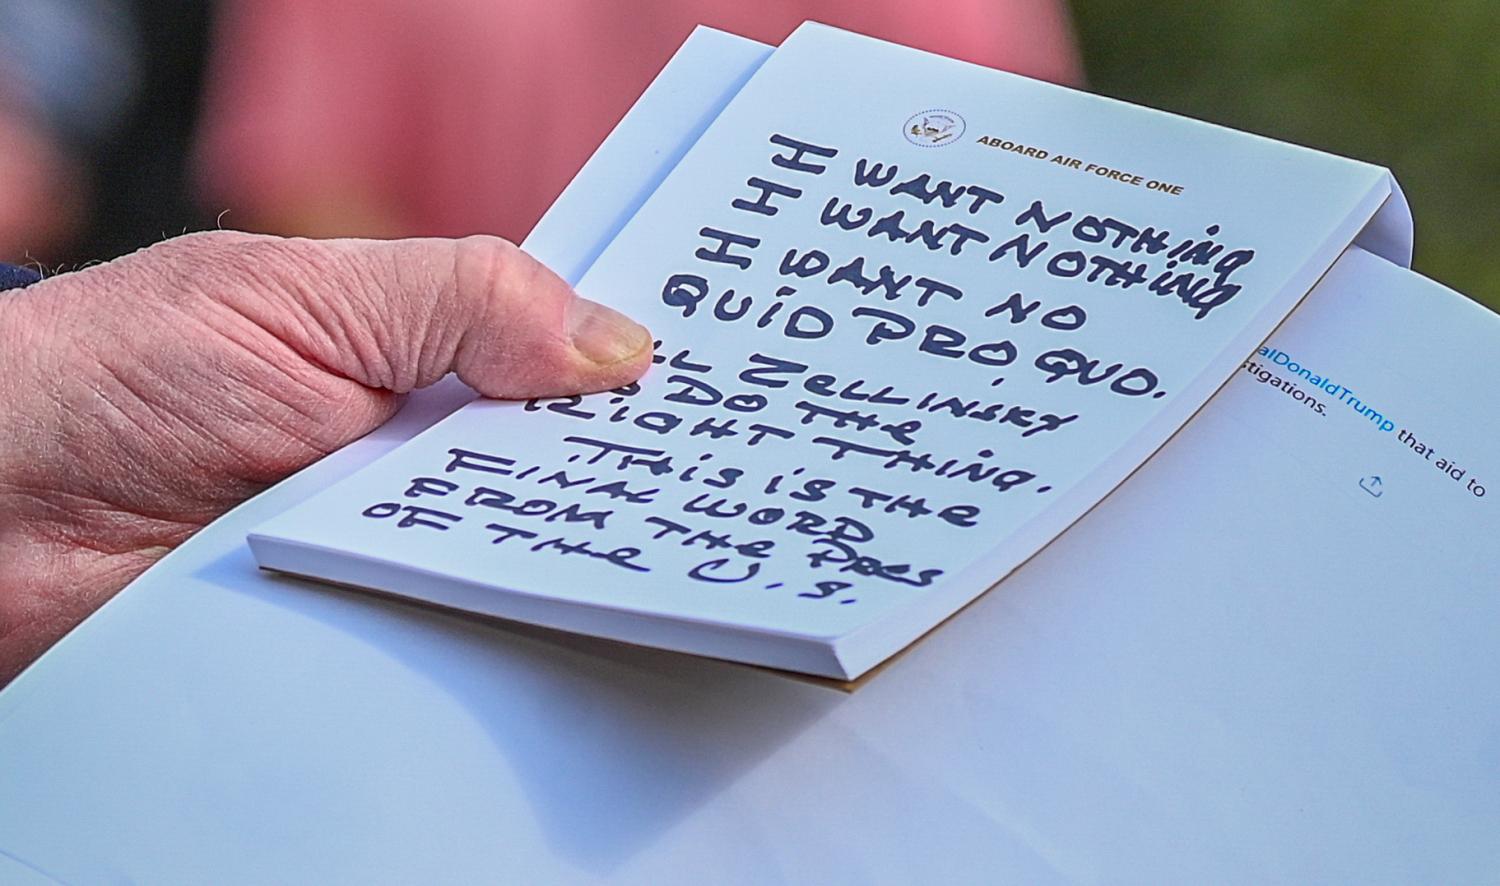 U.S. President Donald Trump holds what appears to be a prepared statement and handwritten notes after watching testimony by U.S. Ambassador to the European Union Gordon Sondland as he speaks to reporters prior to departing for travel to Austin, Texas from the South Lawn of the White House in Washington, U.S., November 20, 2019. REUTERS/Erin Scott - RC26FD9ITUXN